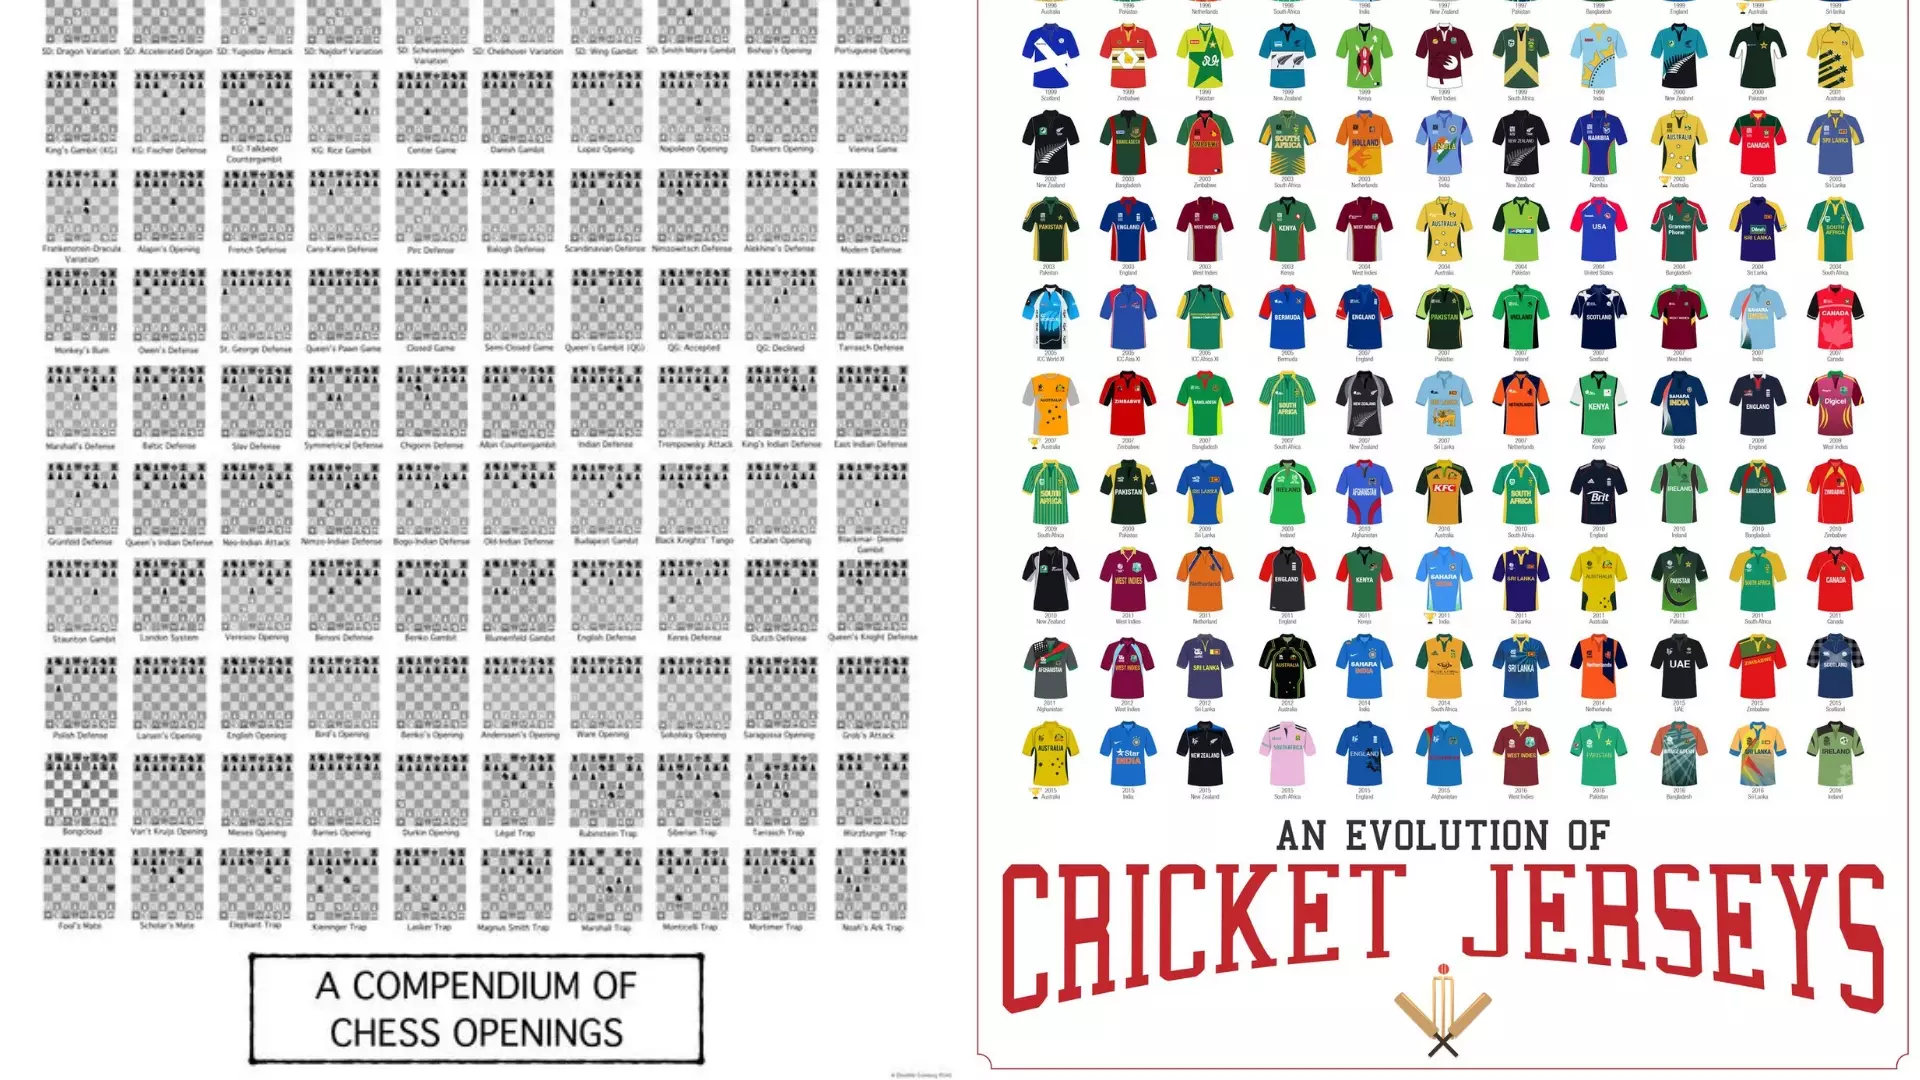 The 'Evolution of Cricket Kits' and the 'Compendium of Chess Openings.'